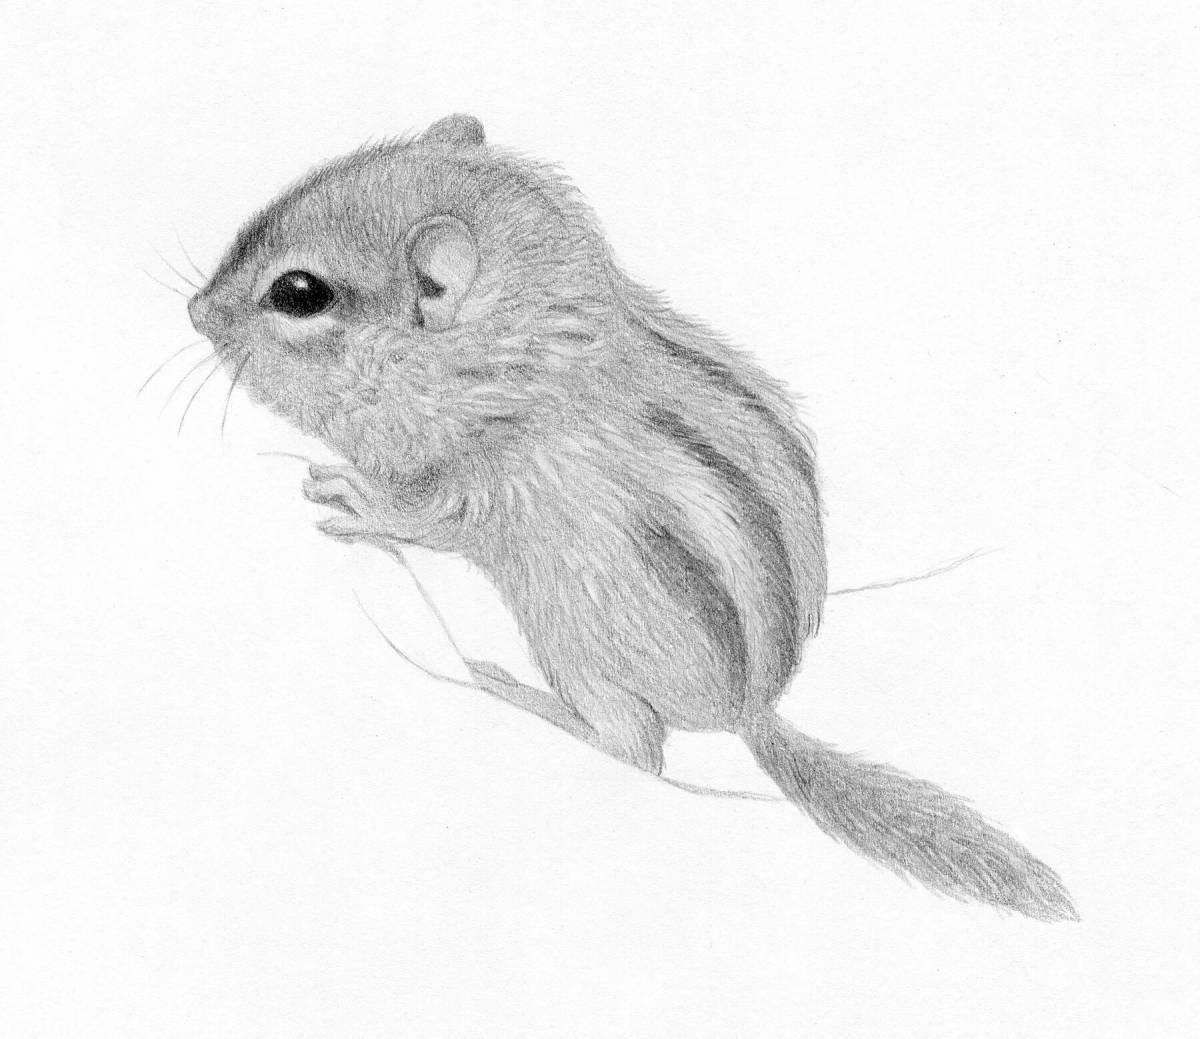 Coloring book glowing forest dormouse